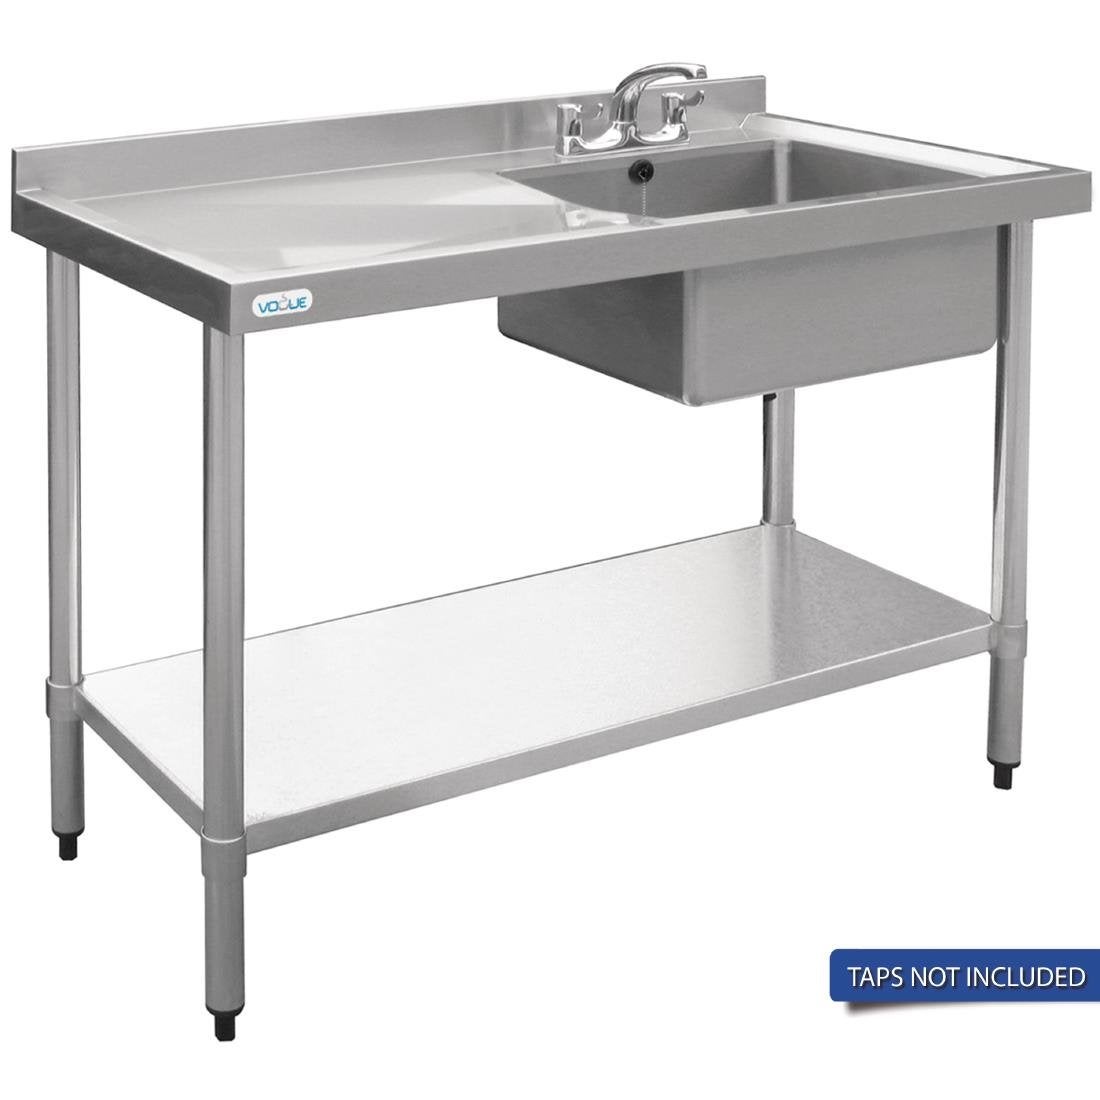 Vogue Single Bowl Sink L/H Drainer - 1000mm 90mm Drain HC901 Stainless Steel Sinks